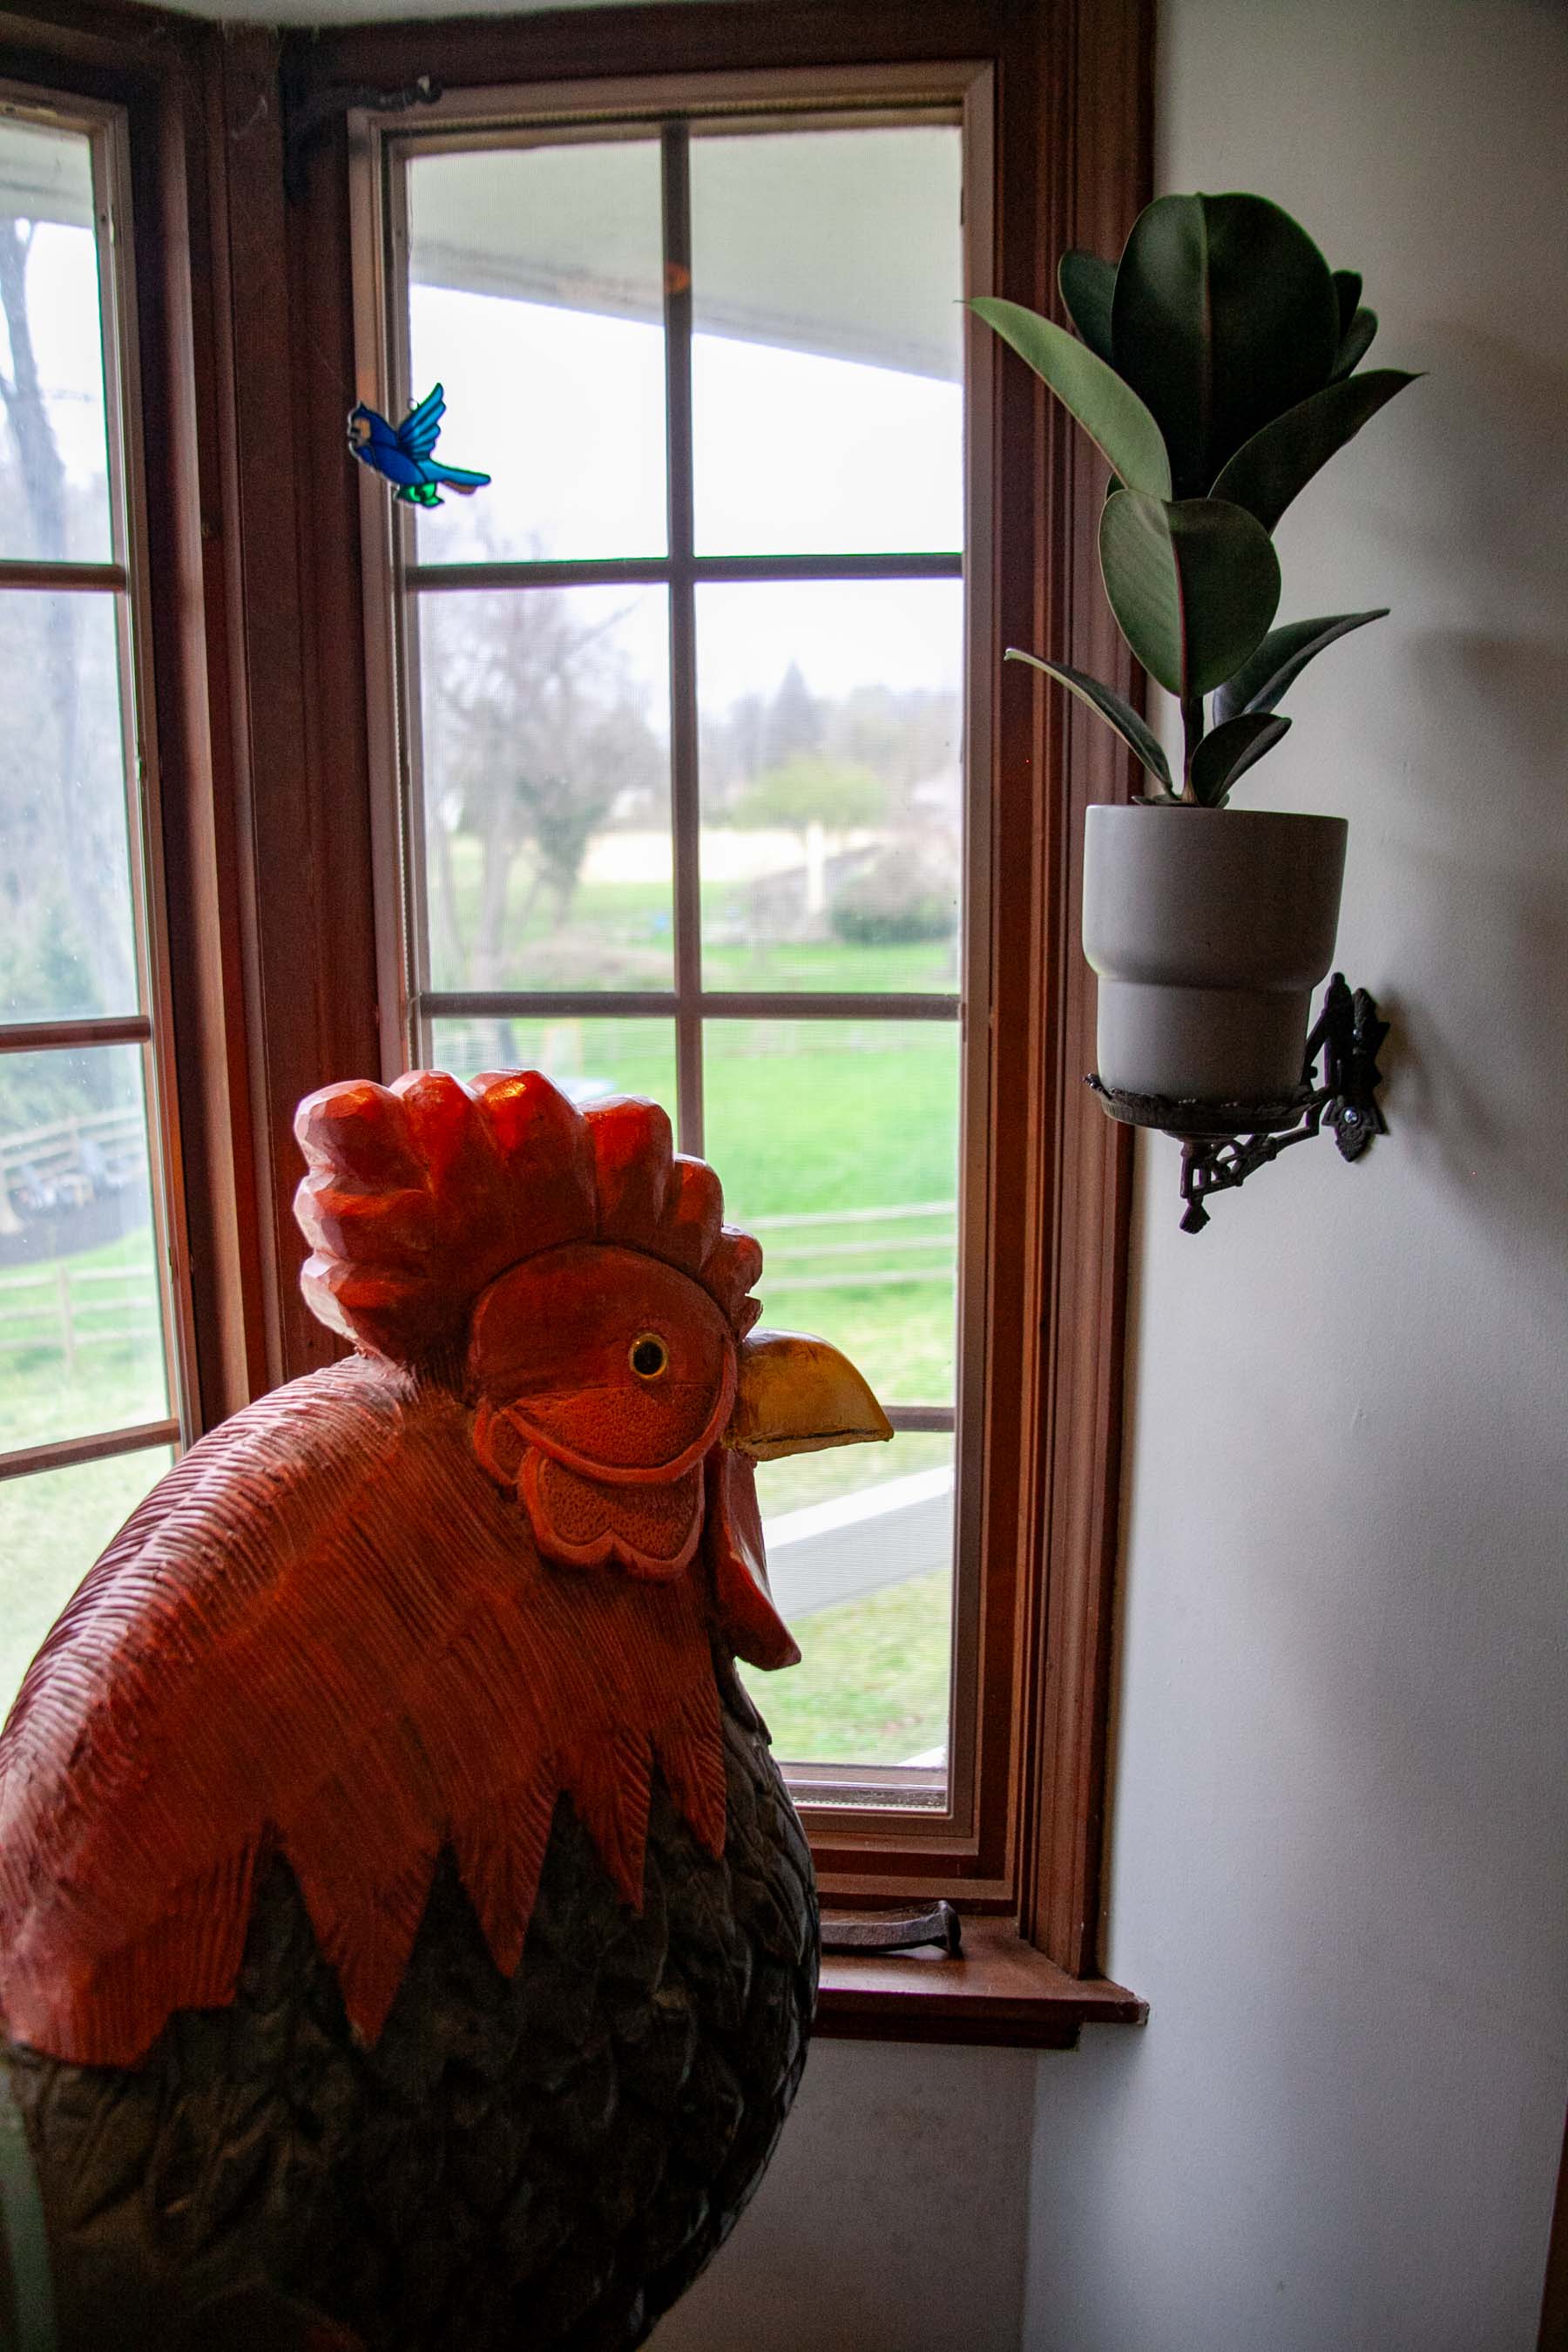 The wooden rooster that once belonged to Liz's grandmother!